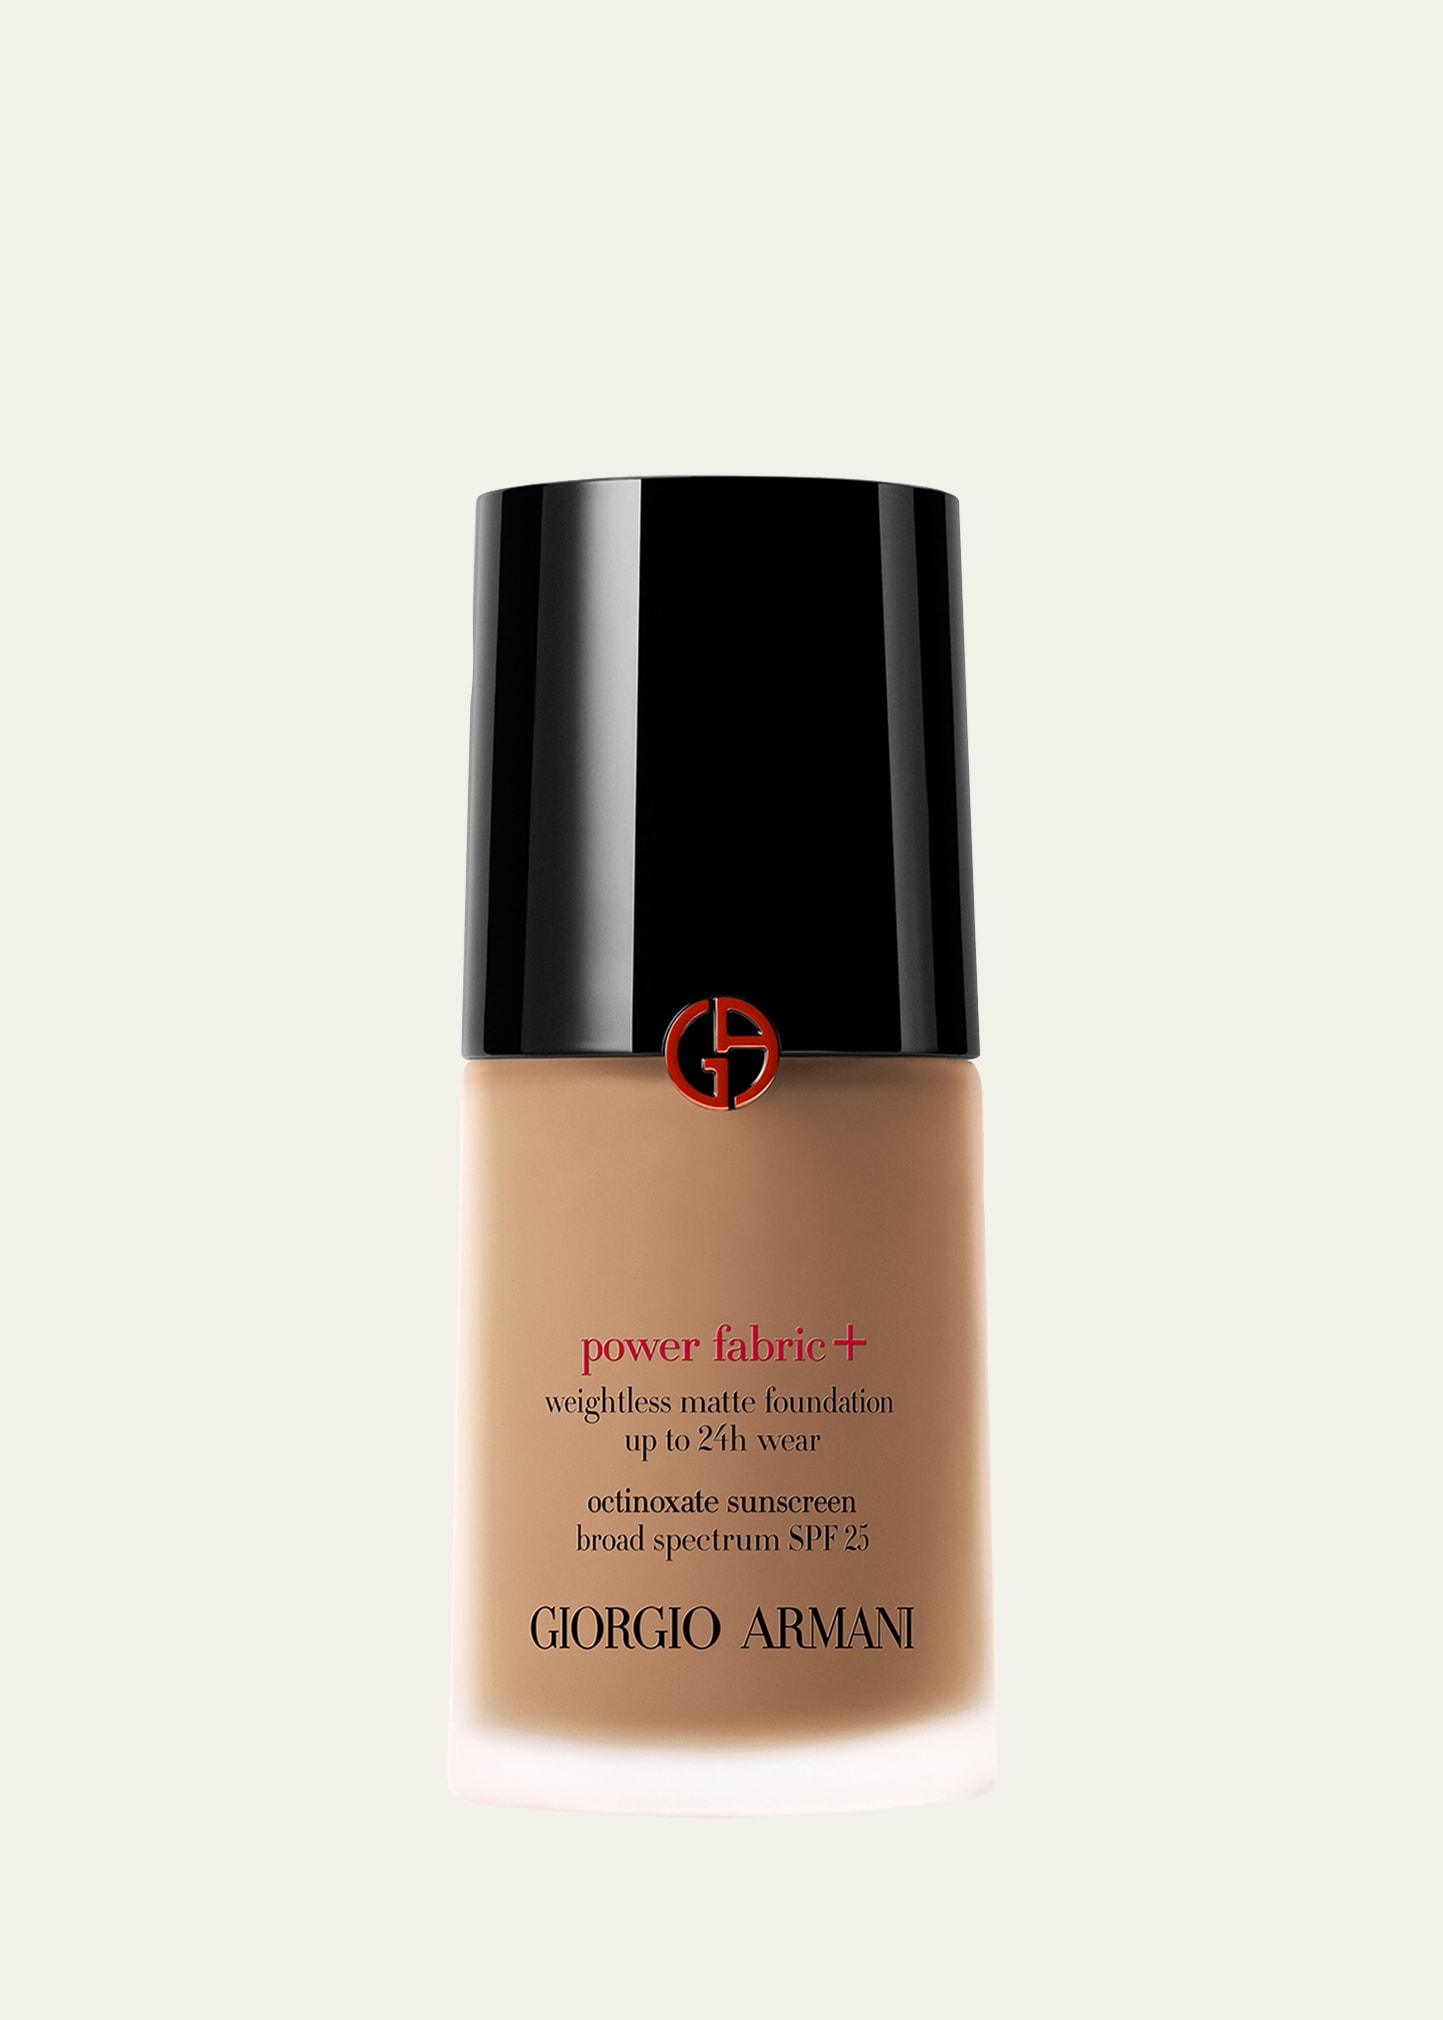 Armani Beauty Power Fabric+ Matte Foundation With Broad-spectrum Spf 25 In 8